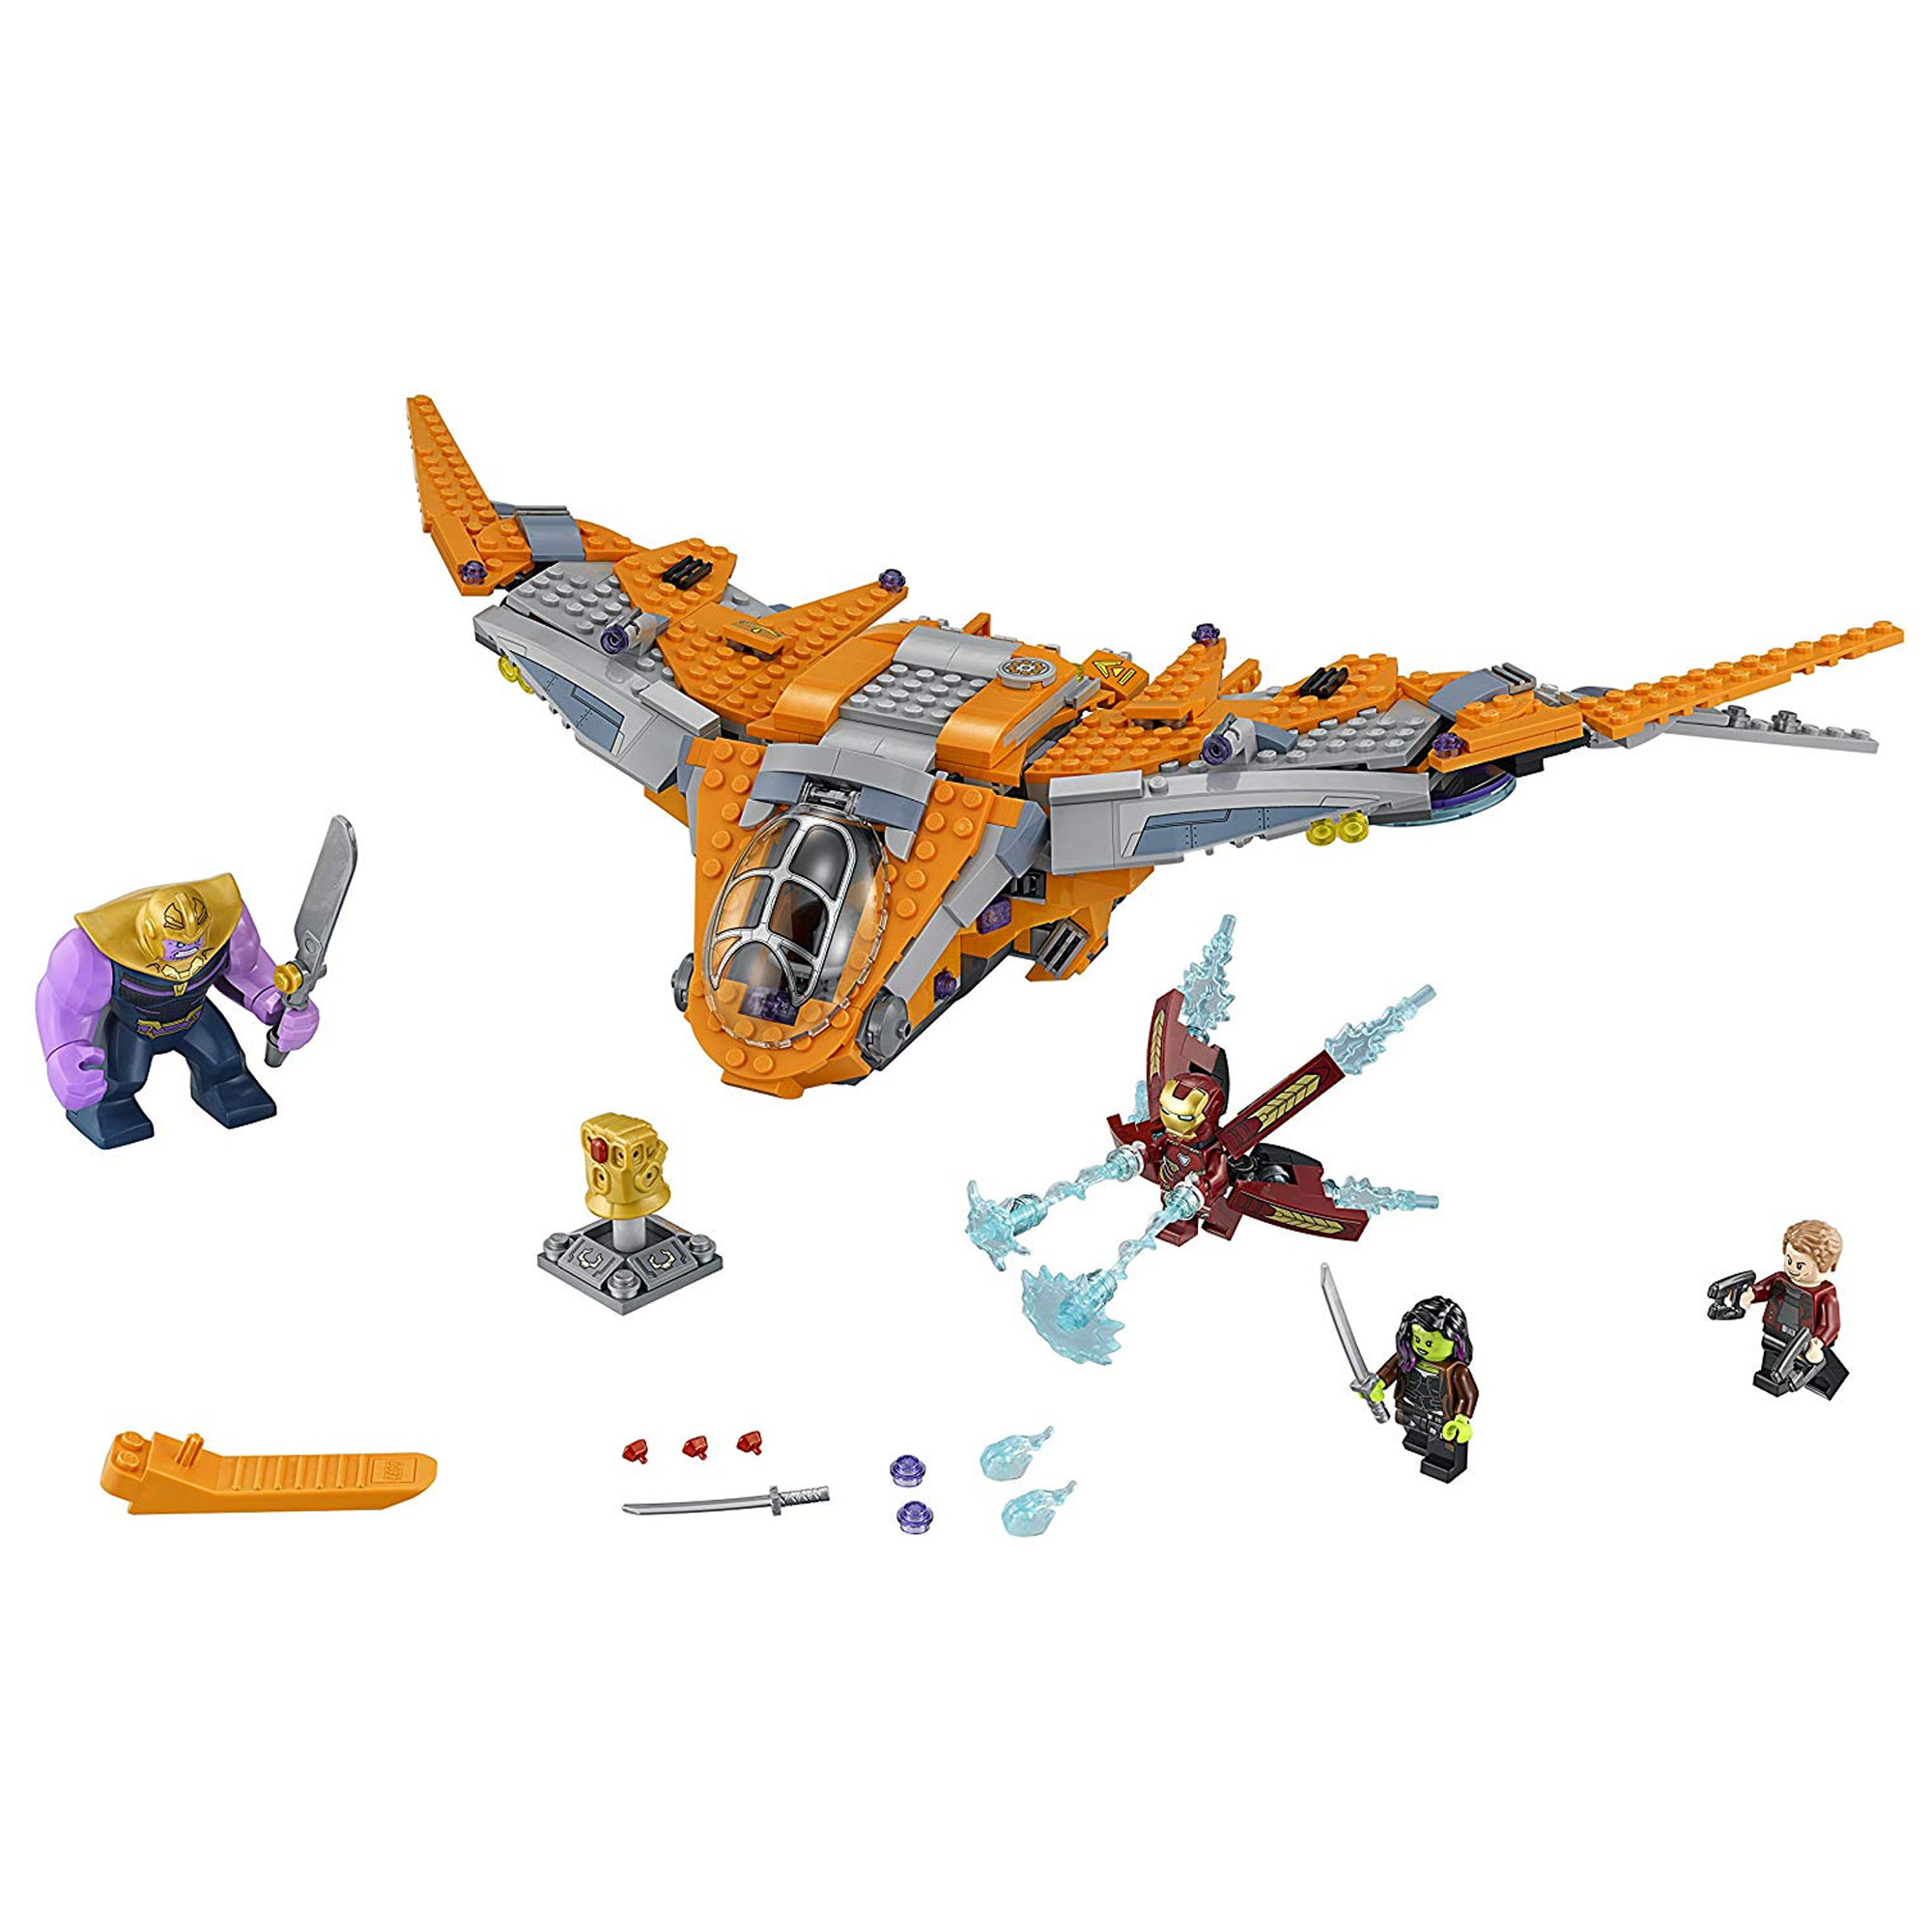 LEGO 76107 Super Heroes 674 piece Thanos Ultimate Battle Building Kit for Kids - image 1 of 8